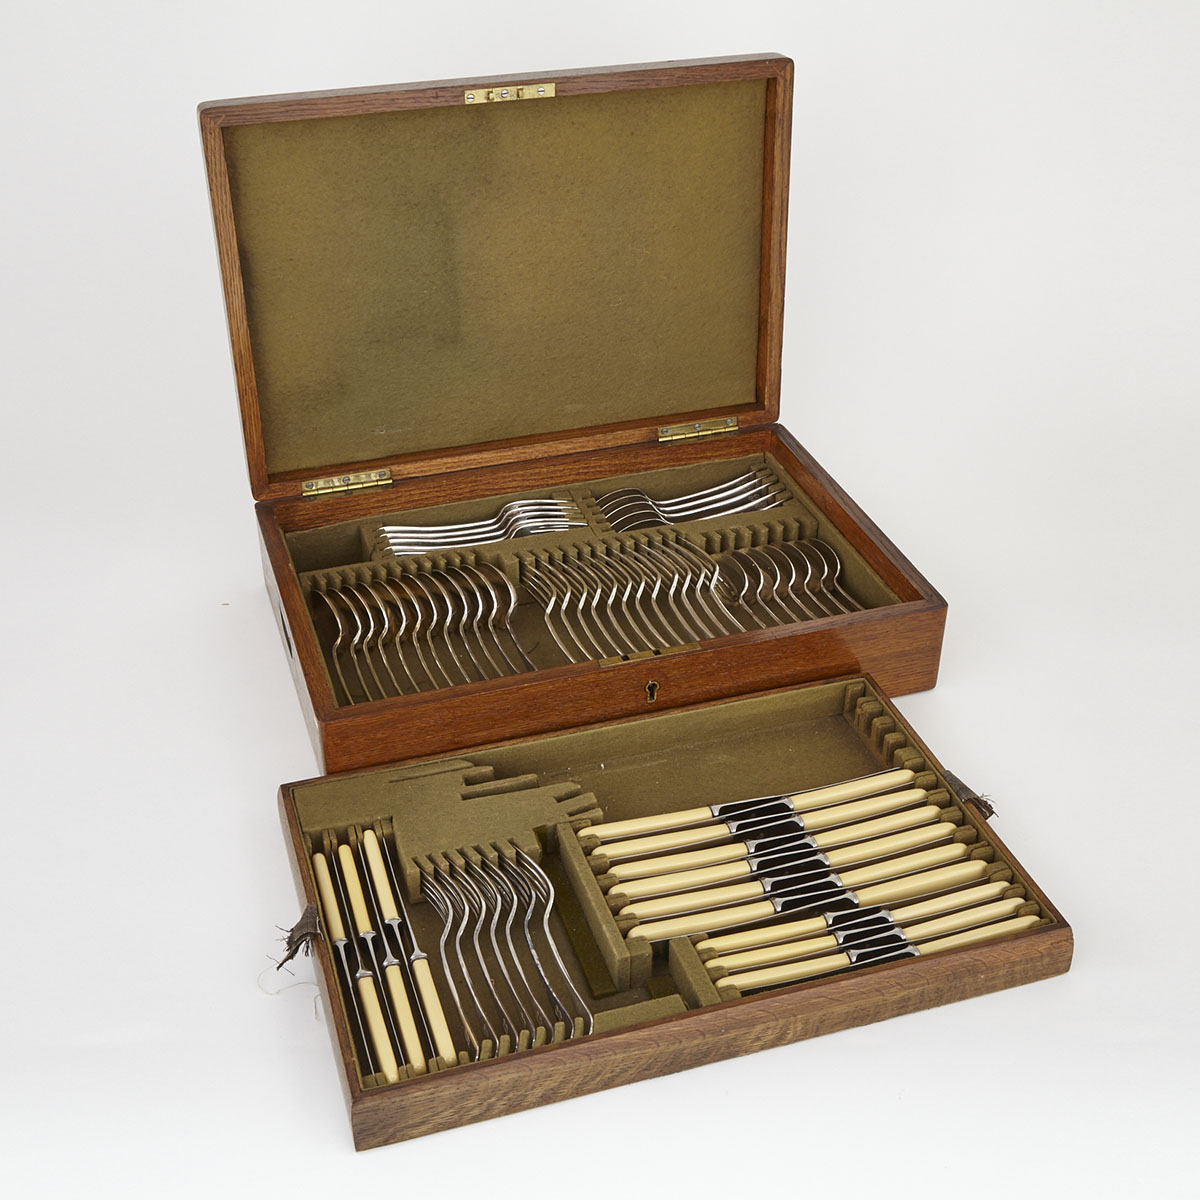 English Silver Plated Old English Pattern Flatware Service, early 20th century